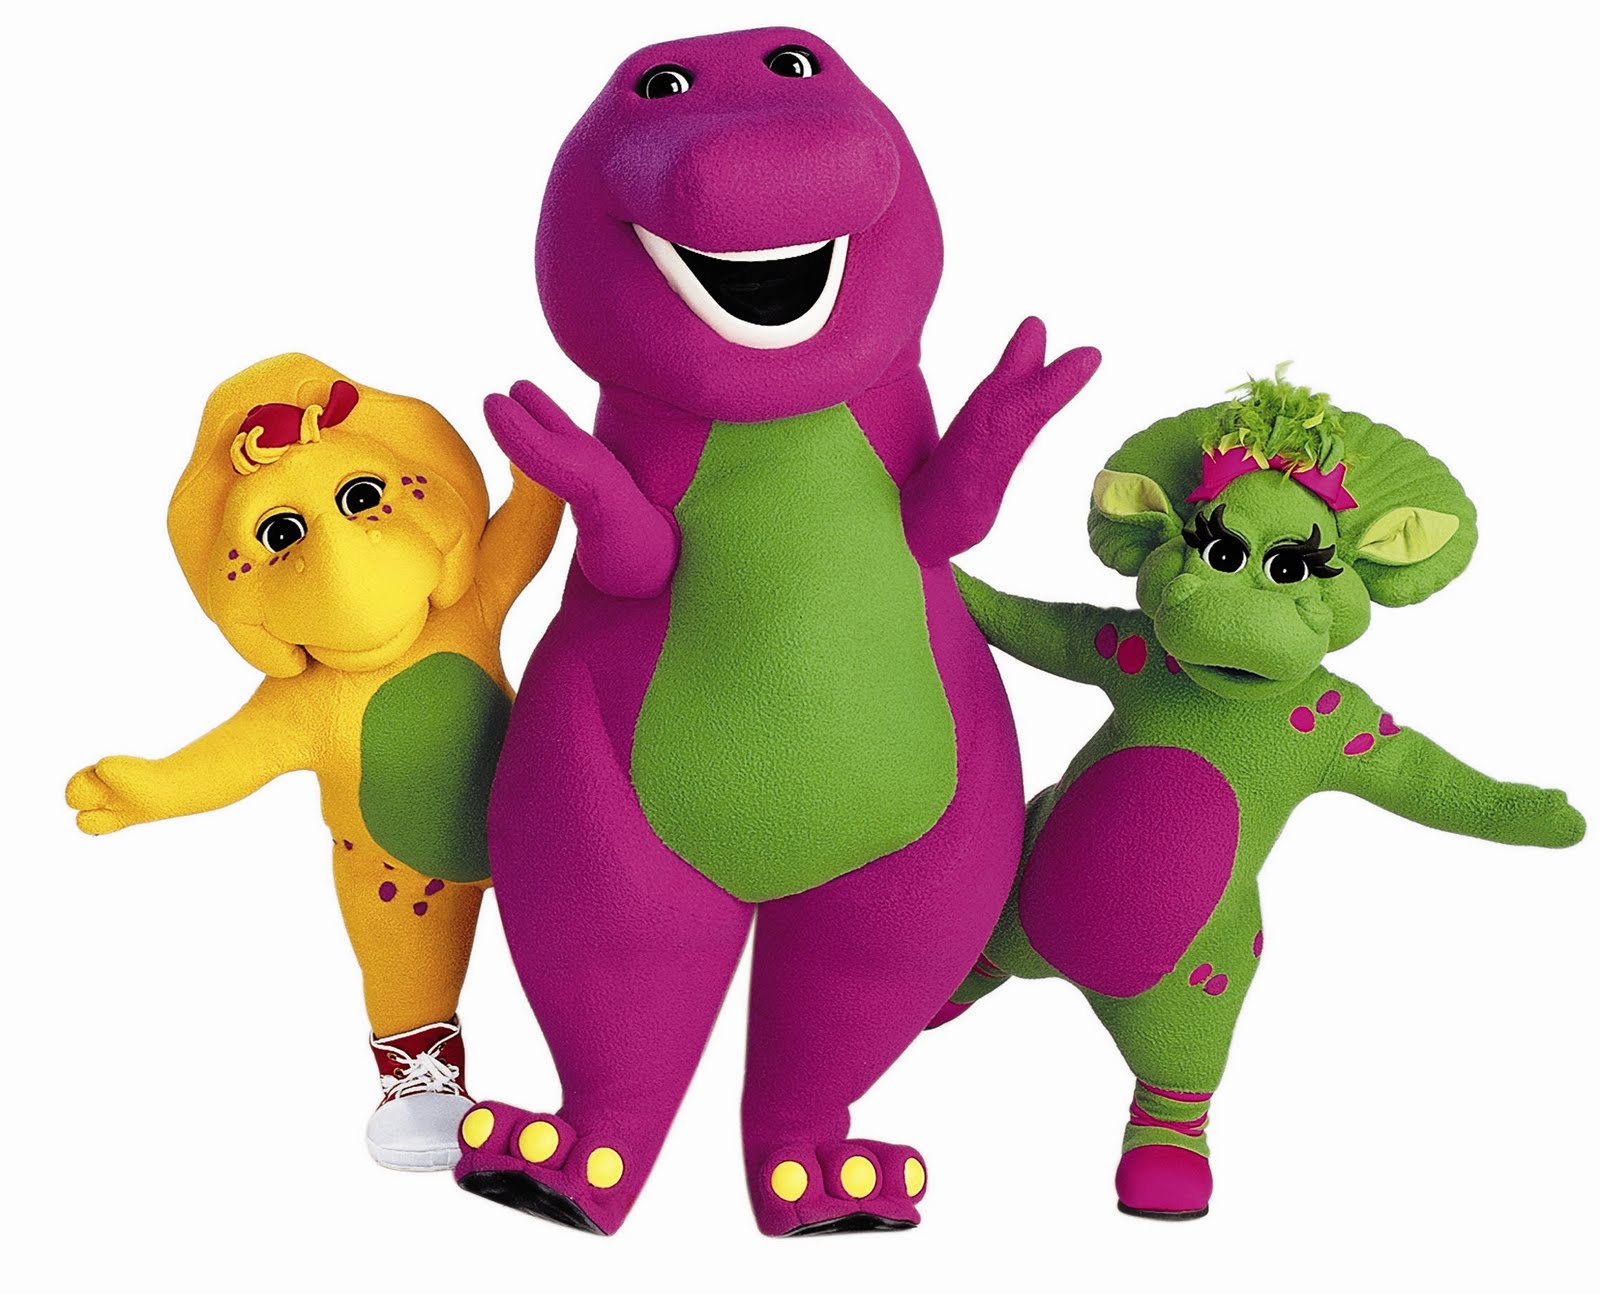 barney-and-friends.jpg